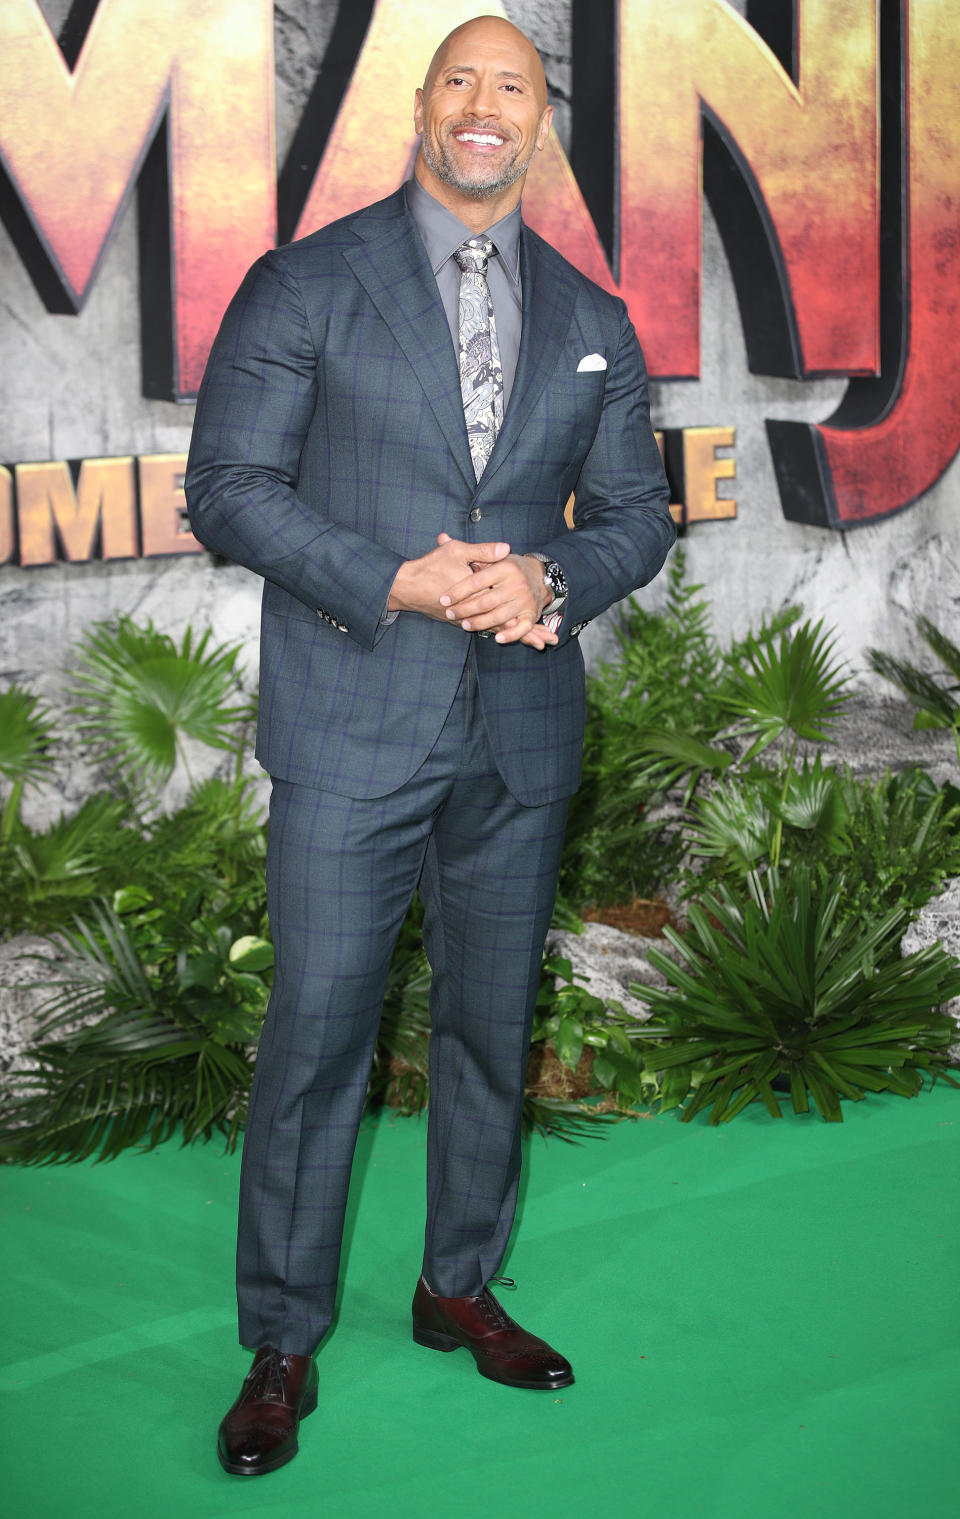 Dwayne Johnson at the ‘Jumanji: Welcome to the Jungle’ film premiere